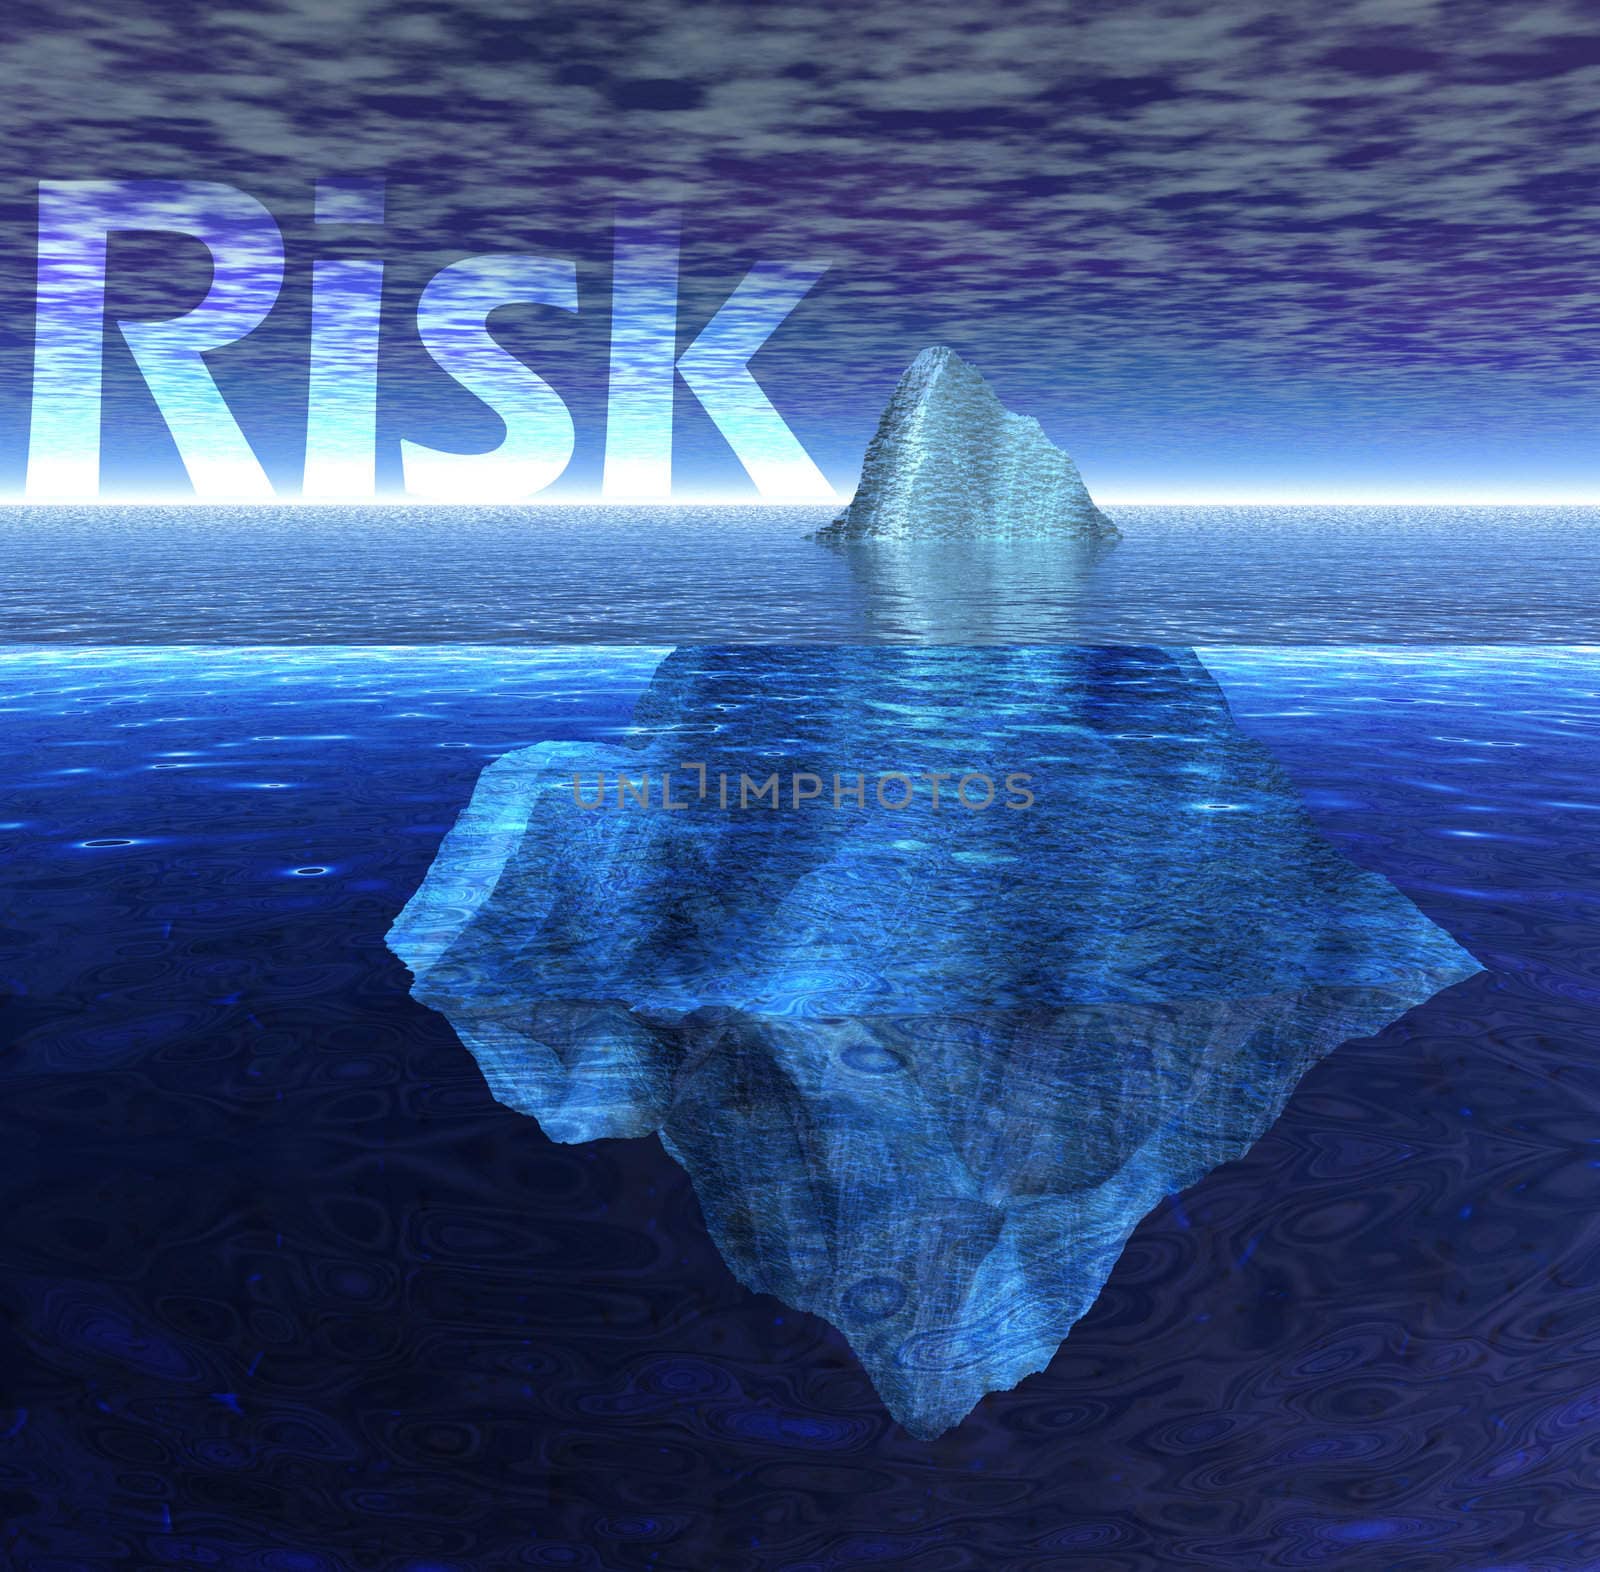 Floating Iceberg in the Ocean with Risk Text by bobbigmac